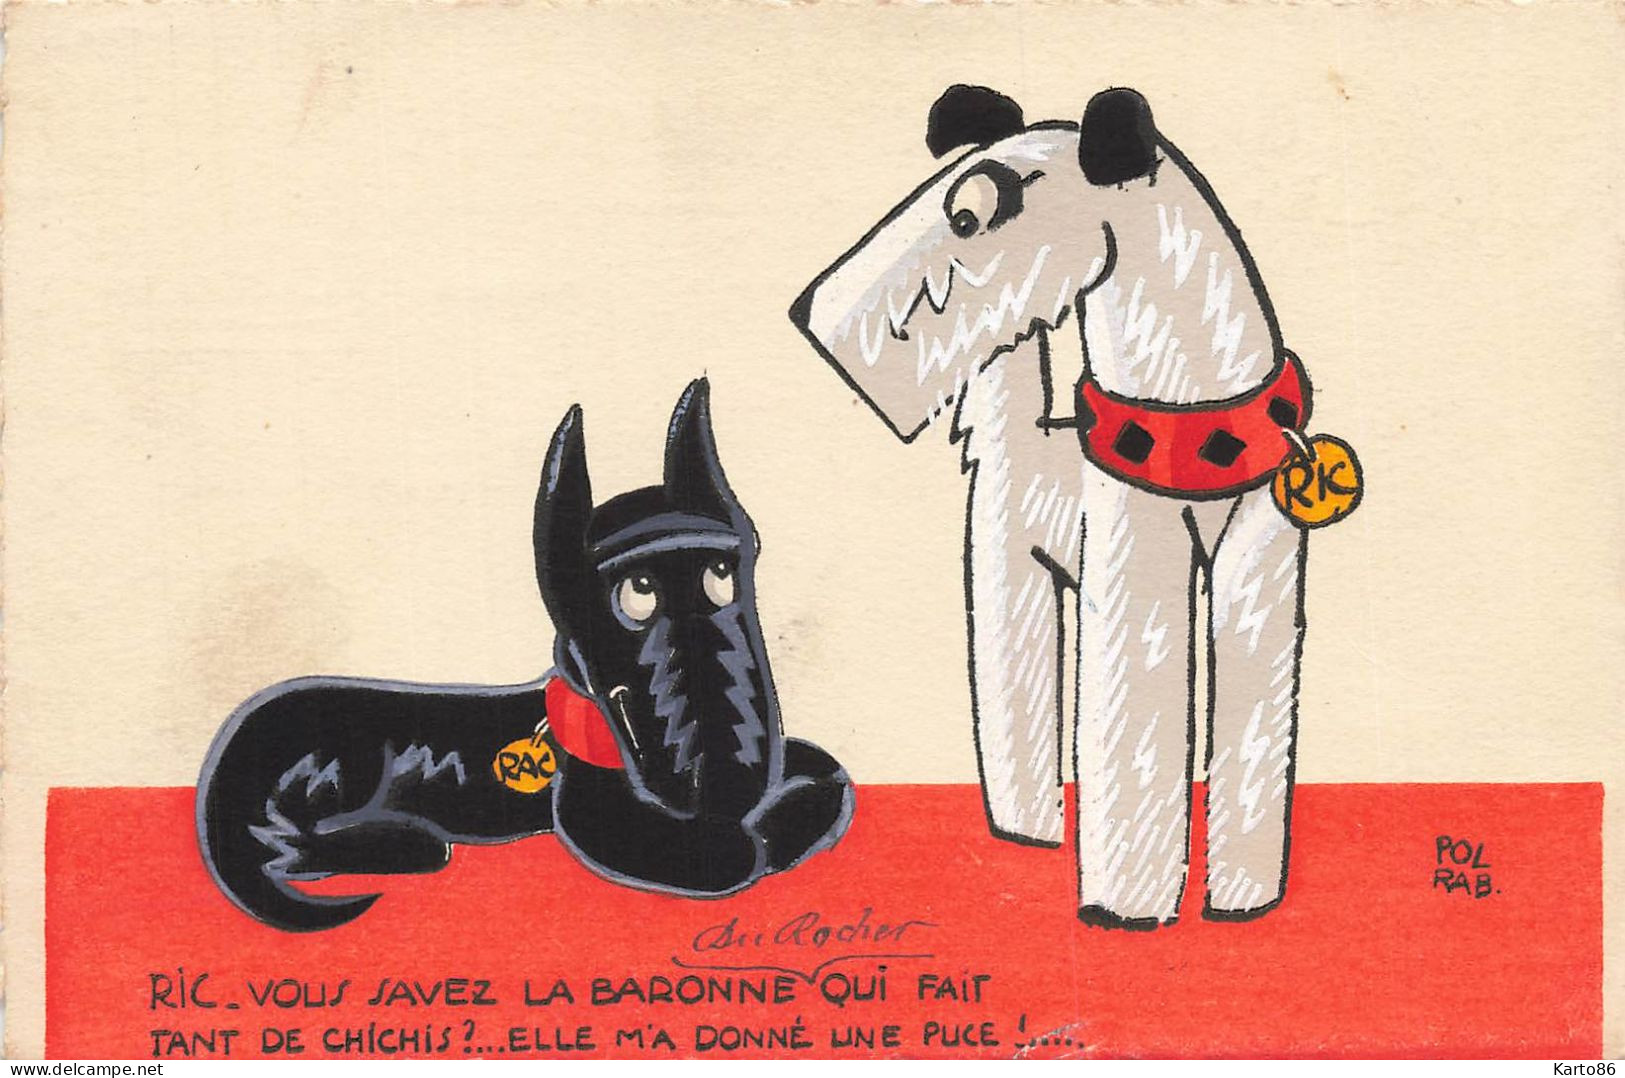 Chiens * CPA Illustrateur POL RAB Pol Rab * Ric ... ! * Carte Postale TUCK * Chien Dog Dogs - Dogs